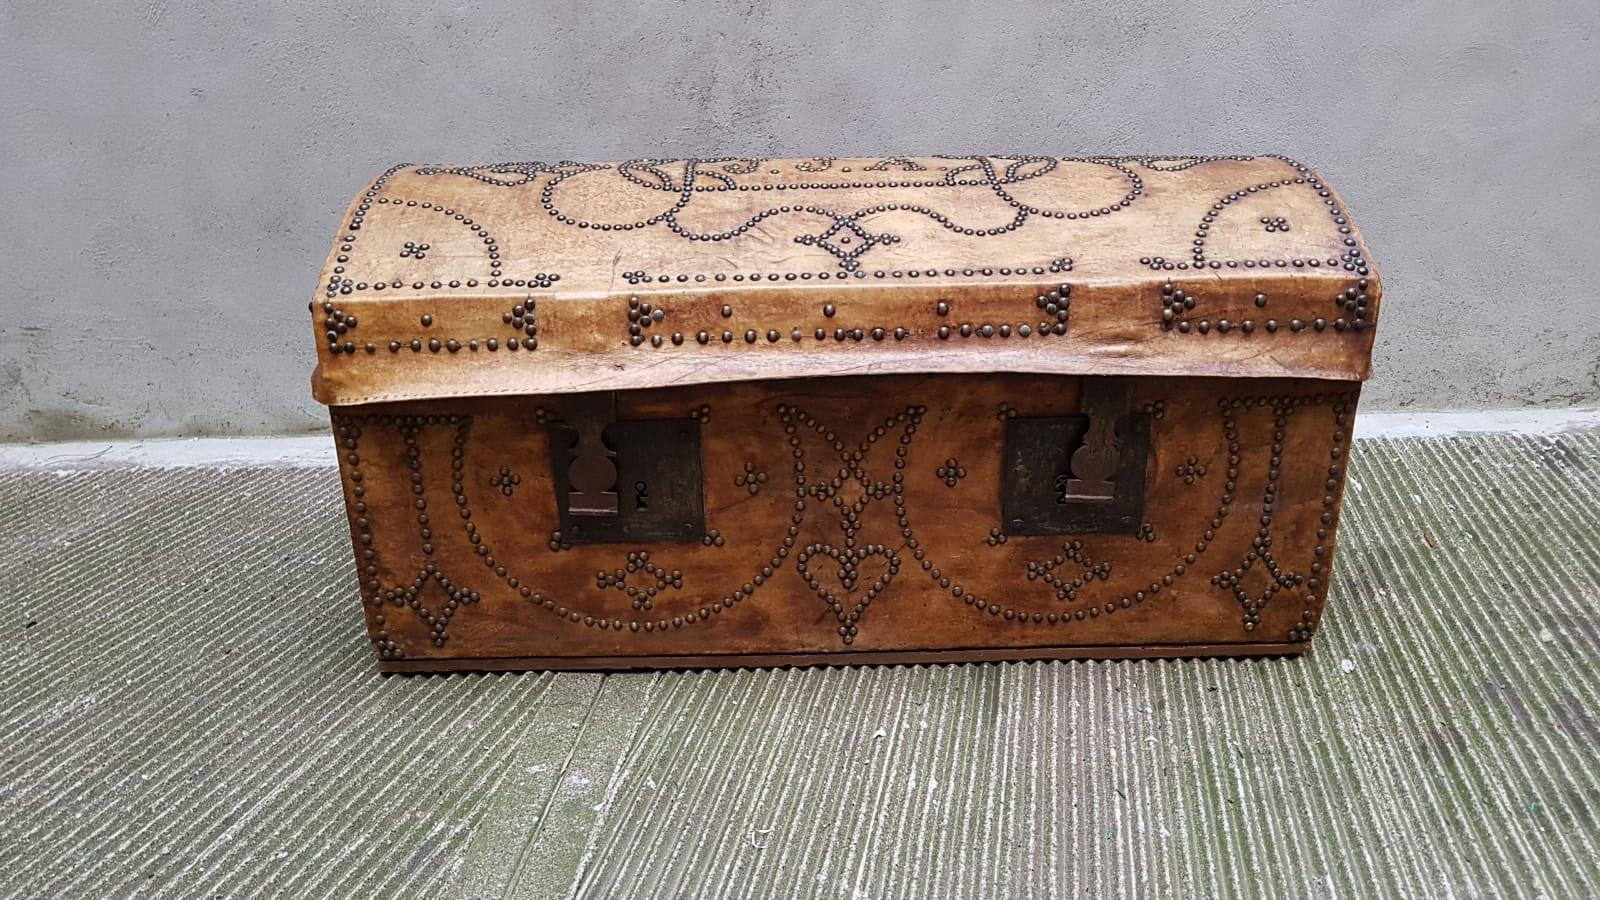 Beginning 20th Century Leather Portoguese Trunk for Travel, 1930 For Sale 2